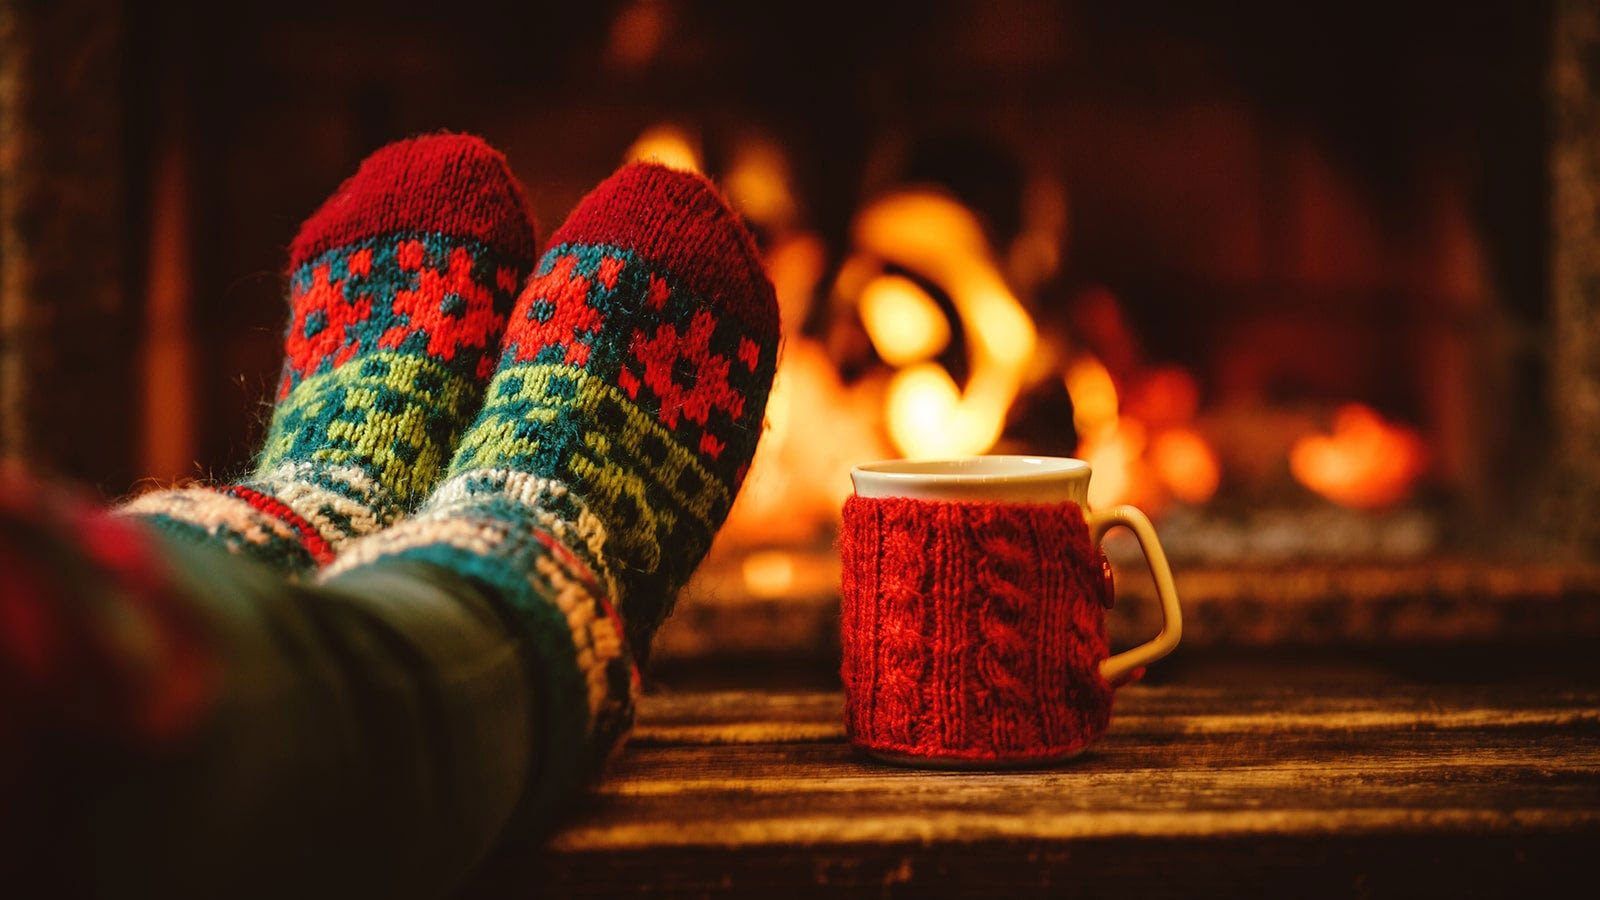 How to tune out holiday stress this year